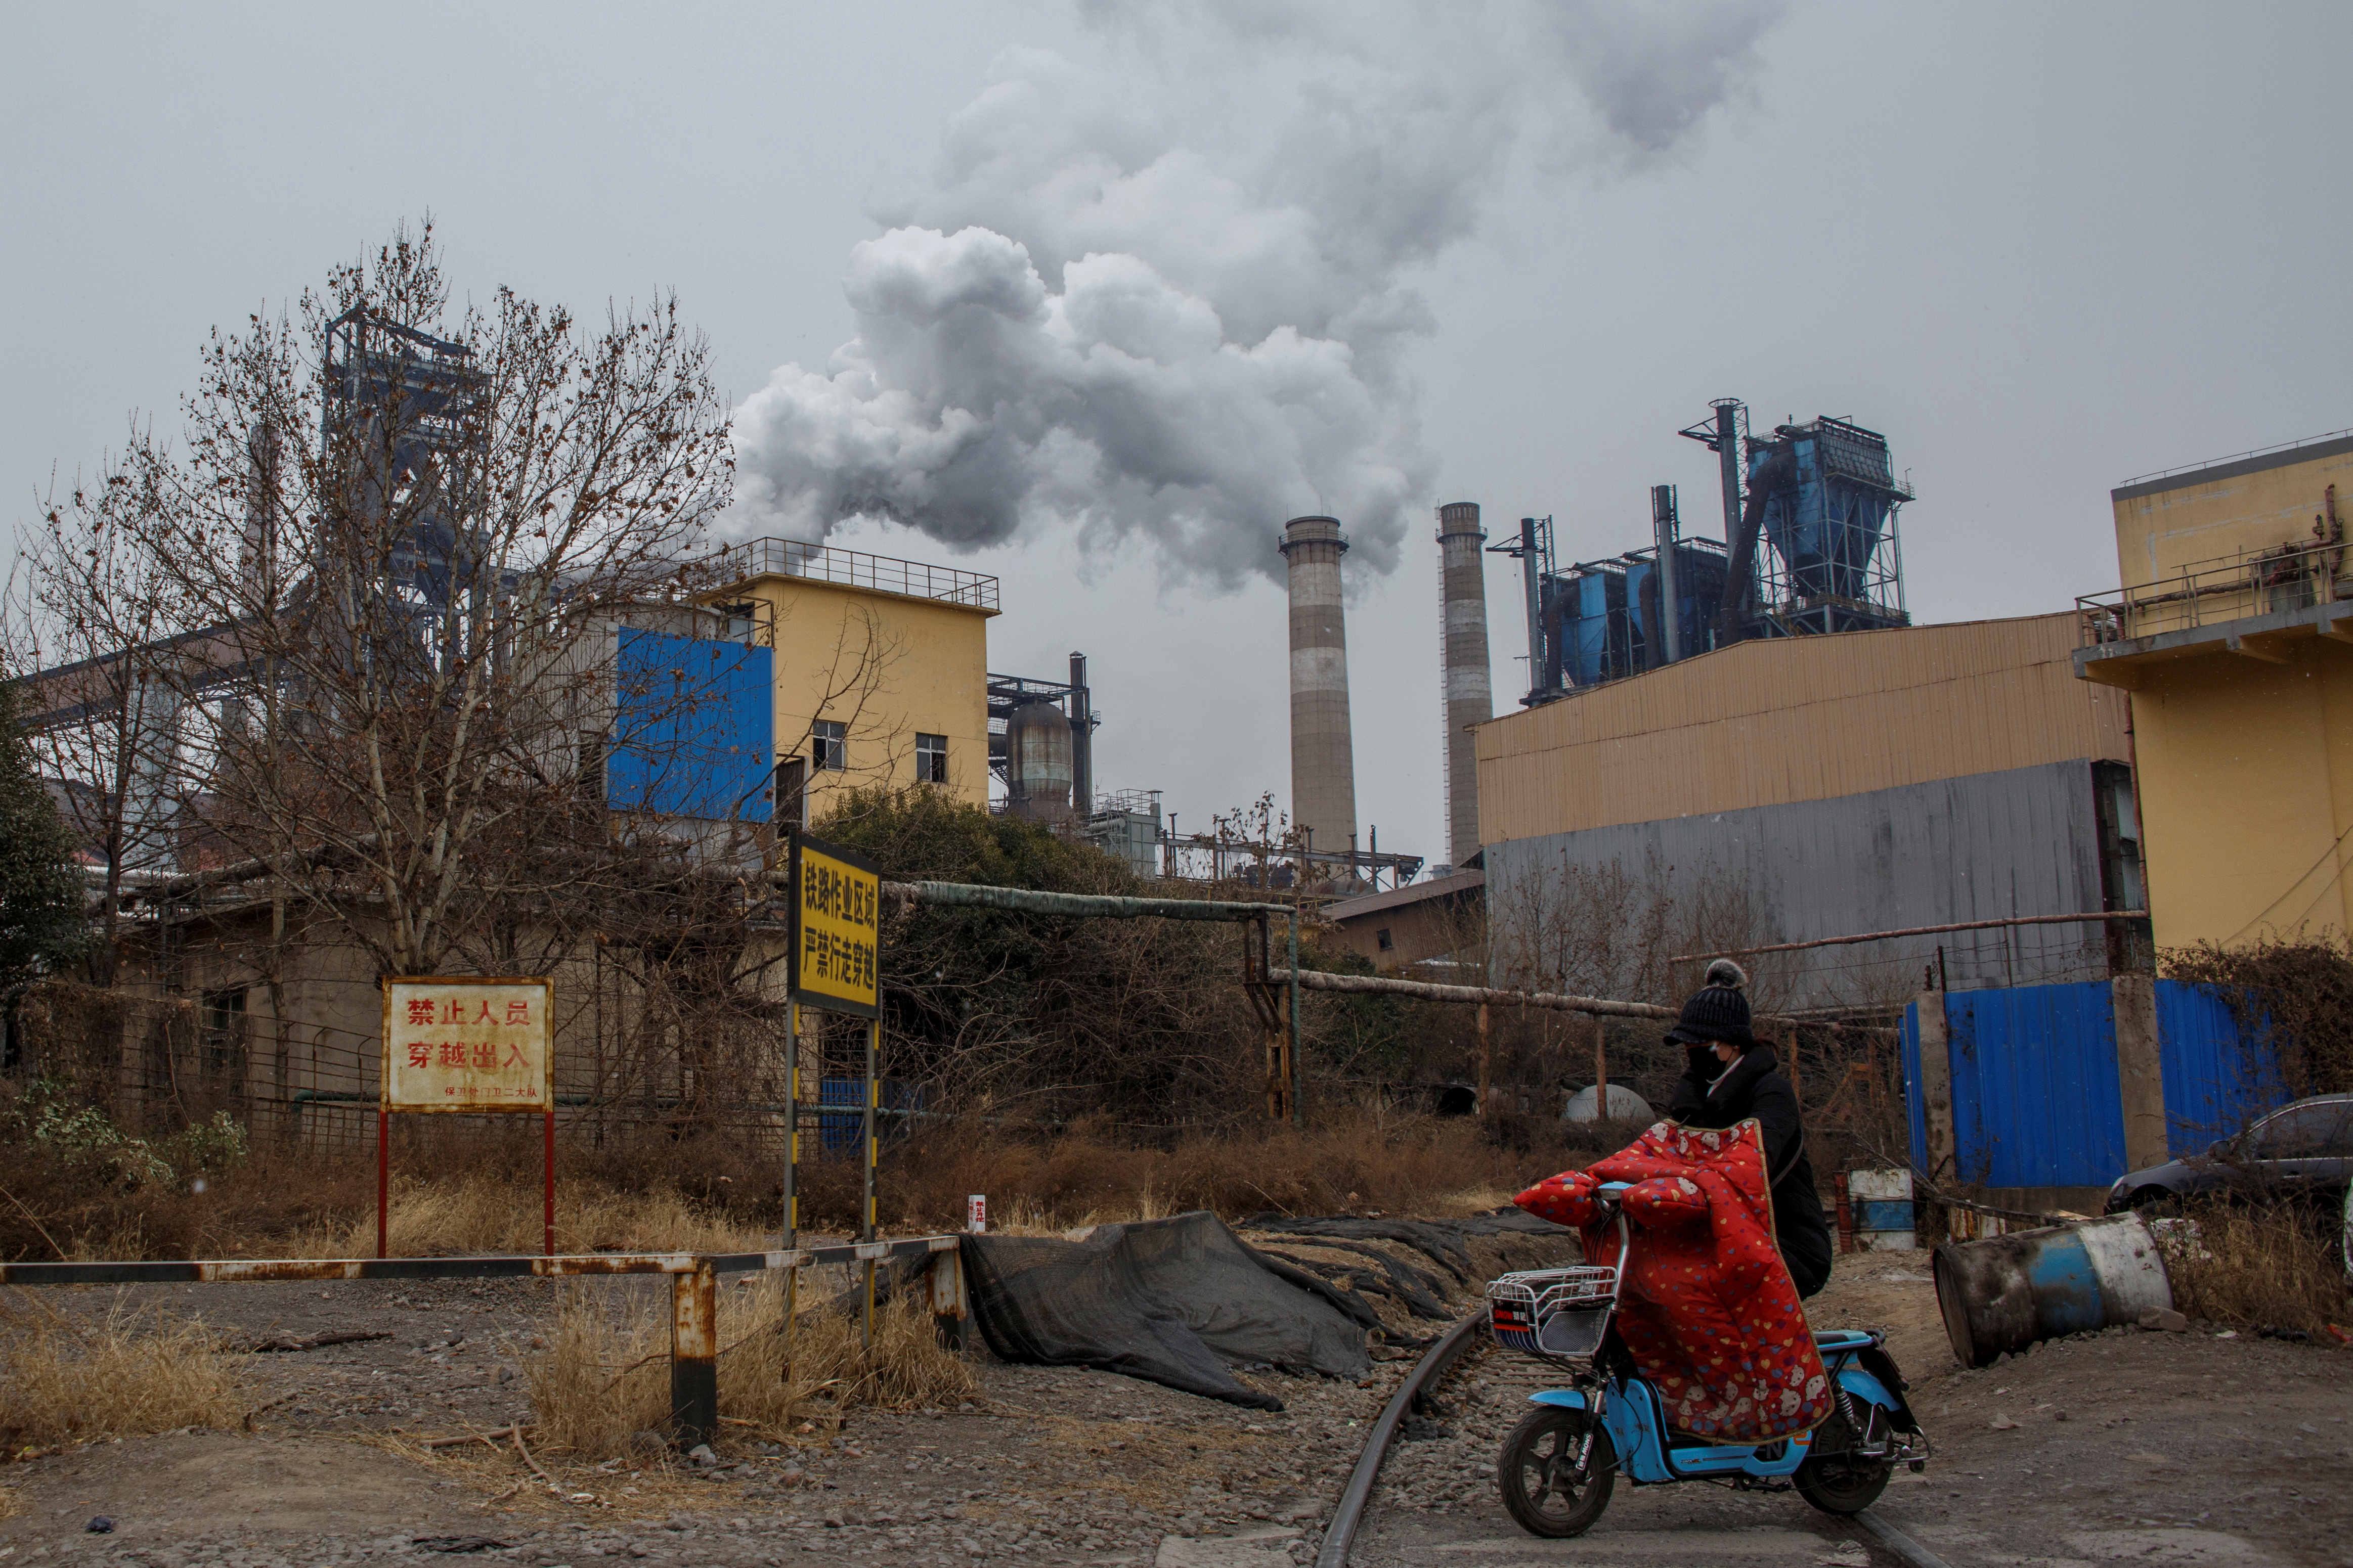 A woman rides a scooter past a steel plant in Anyang